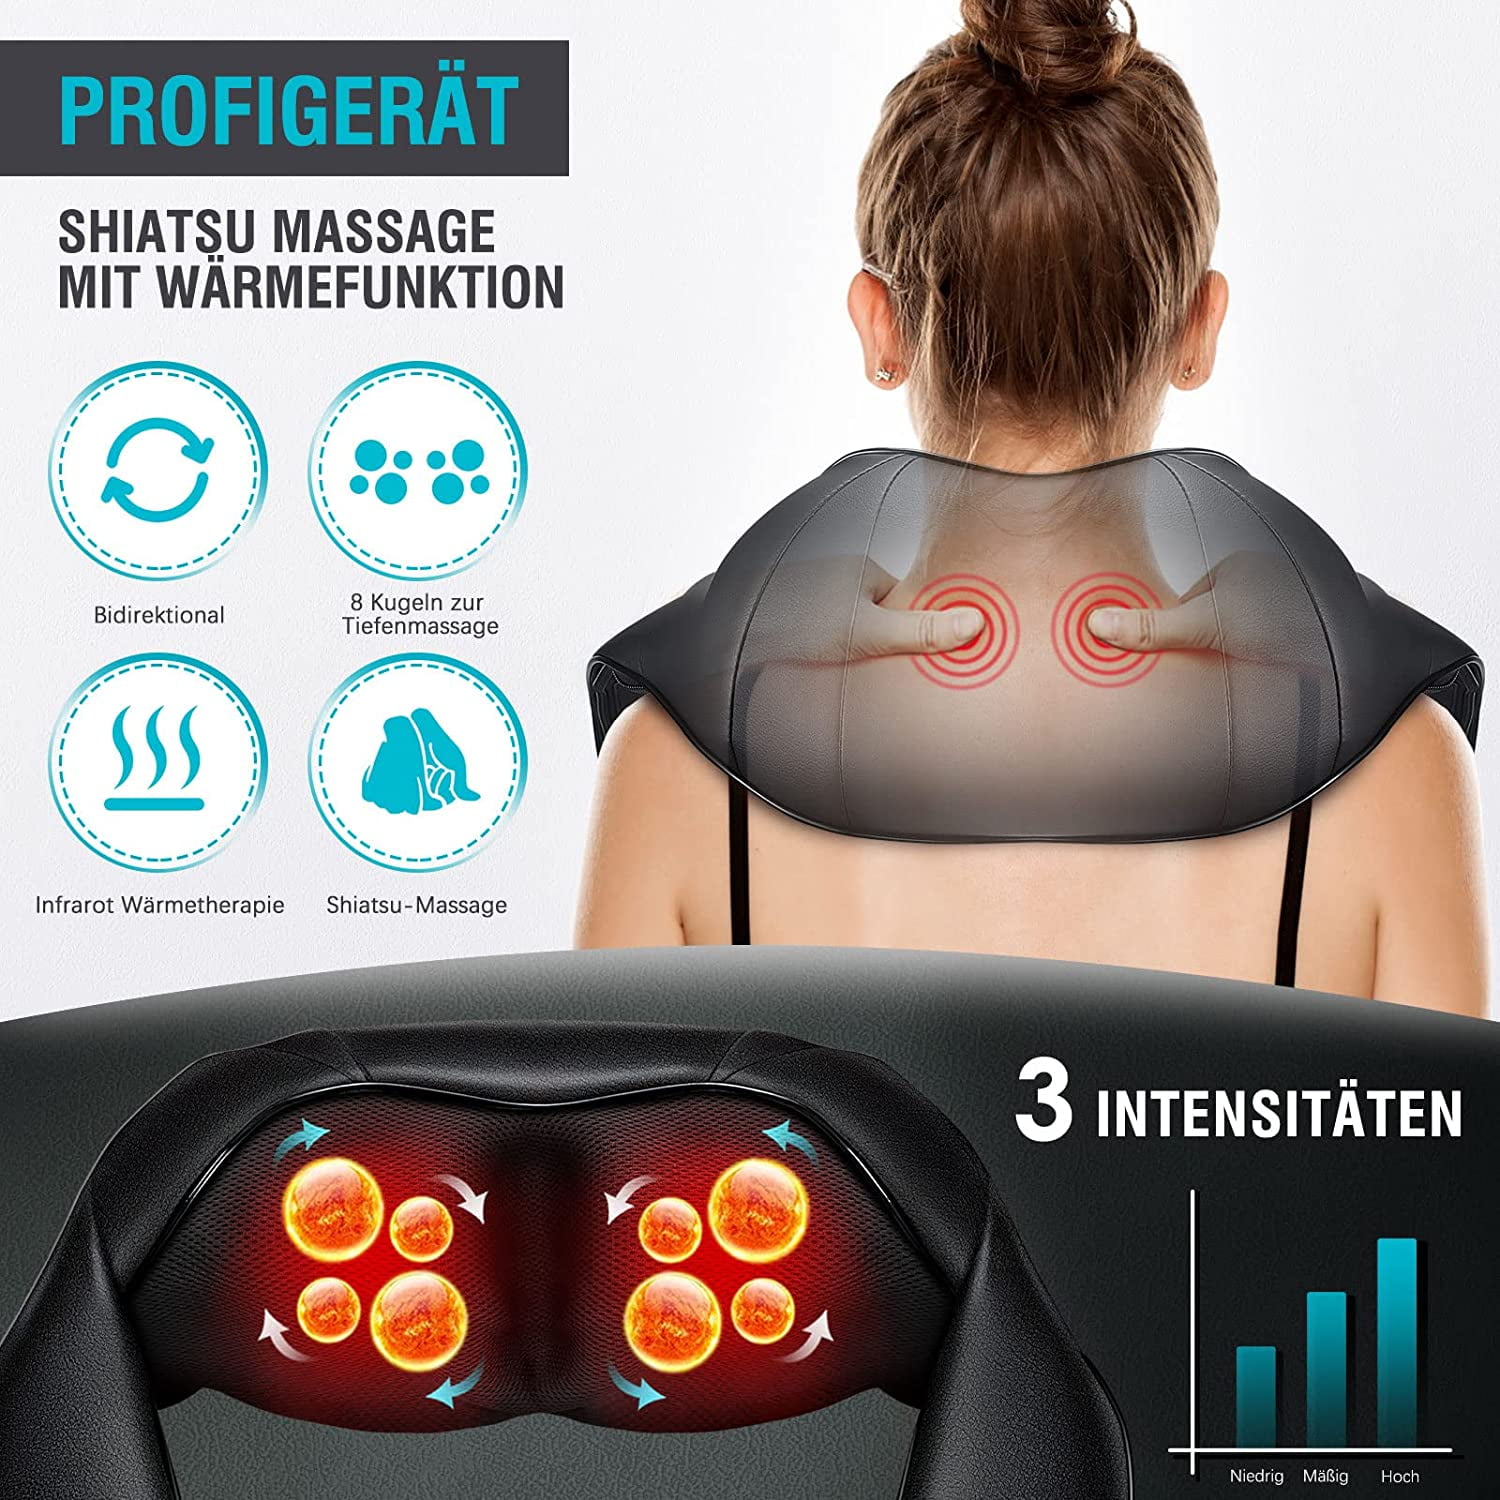 Massage Shawl Car Six-button Shoulder And Neck Massager - Tension seekers